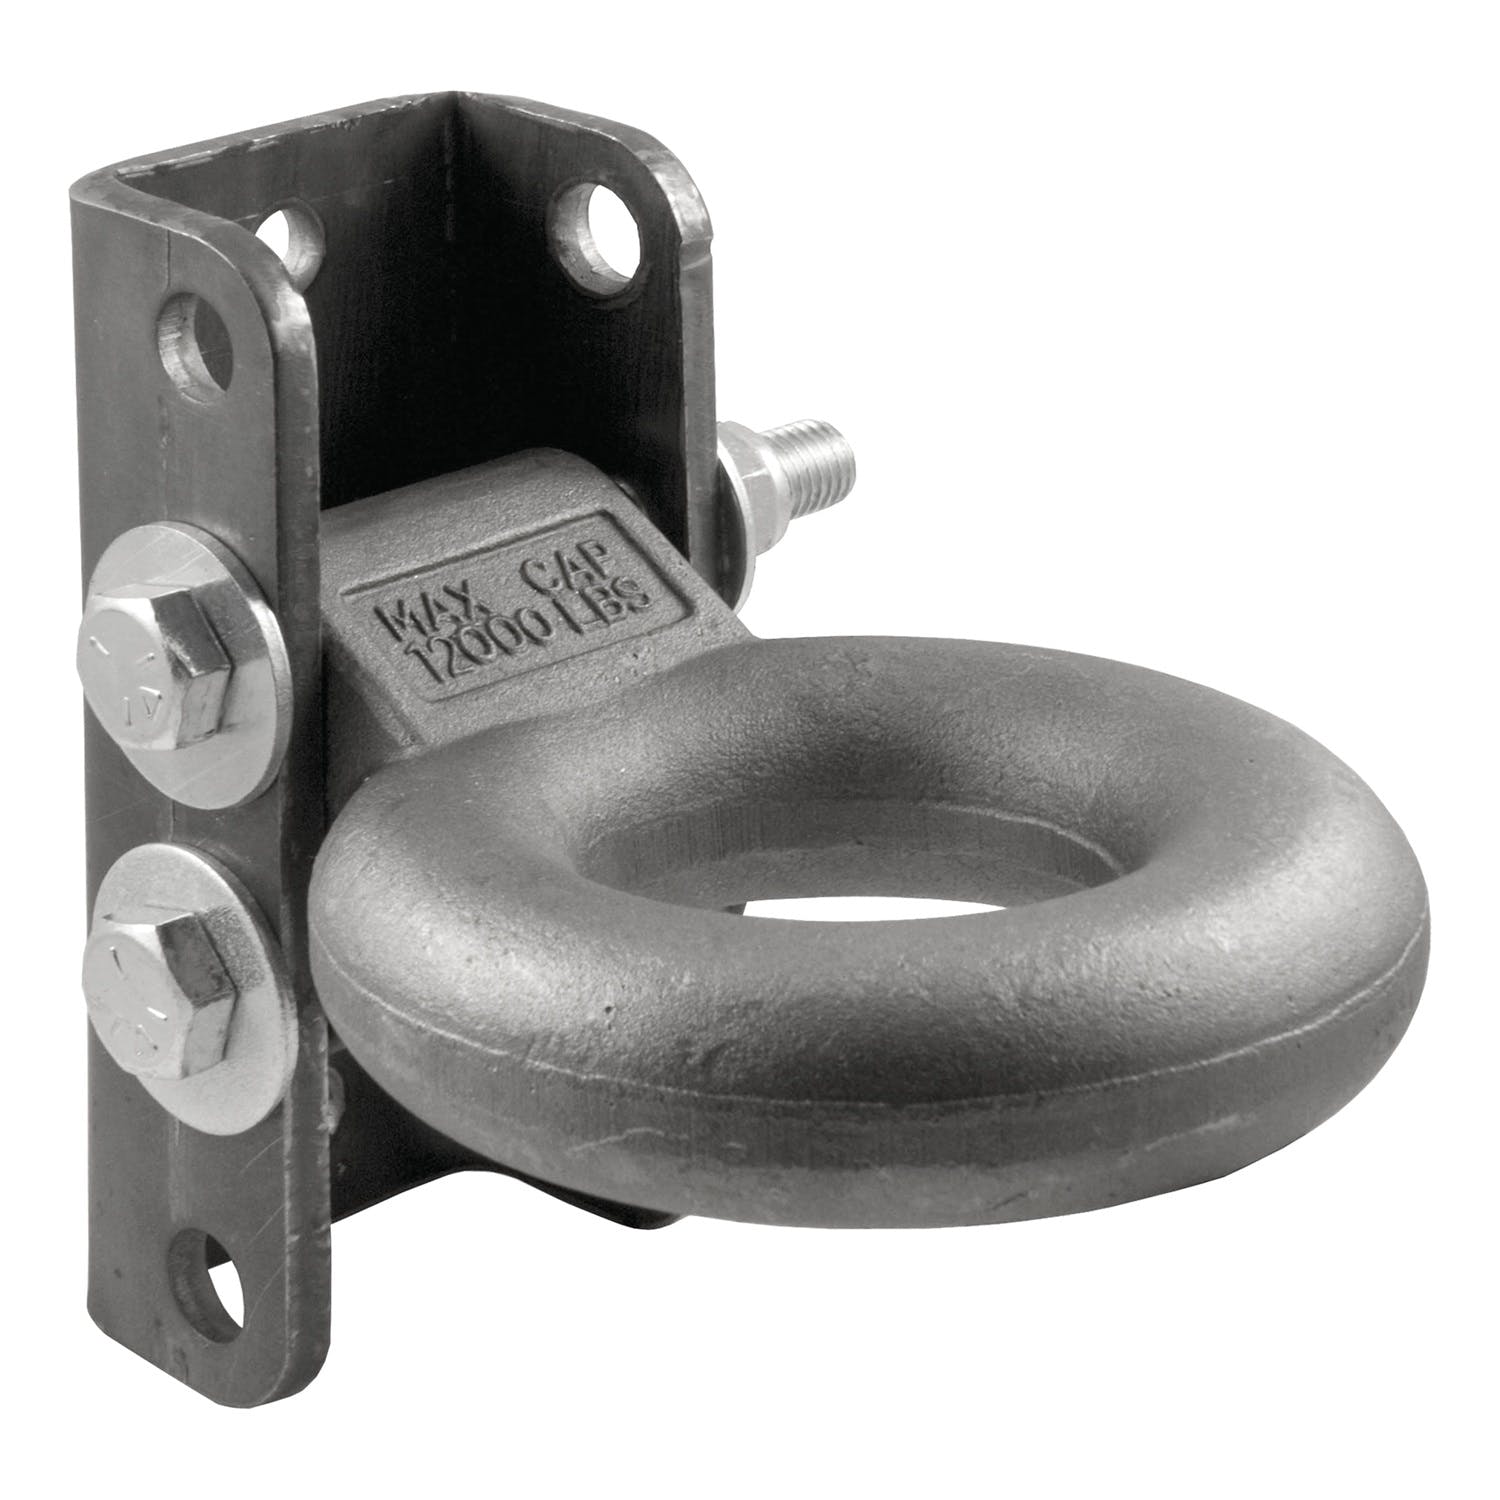 CURT 48631 Adjustable Lunette Ring (12,000 lbs., 3 Eye, 7-1/2 Channel Height)